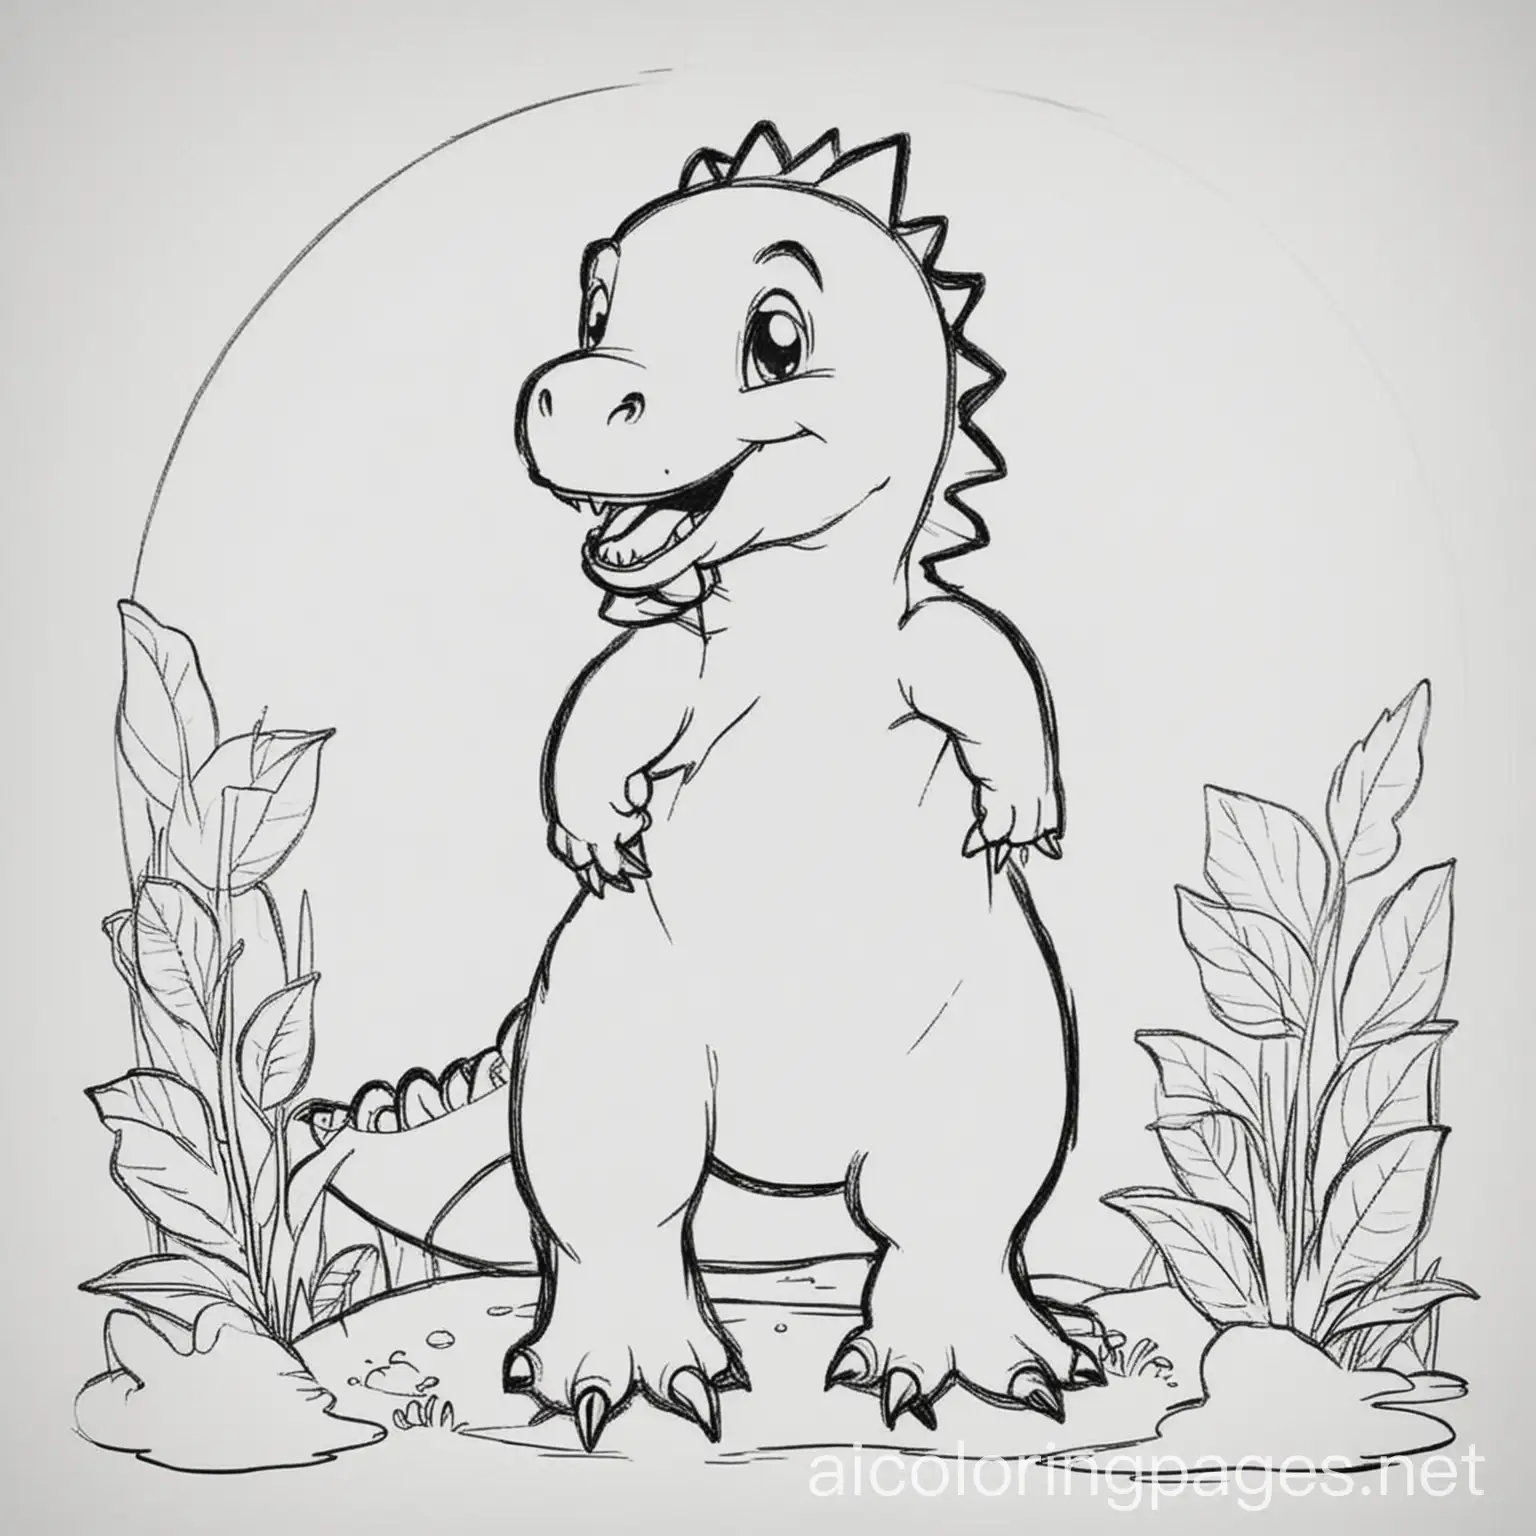 Simple-Dinosaur-Coloring-Page-for-Kids